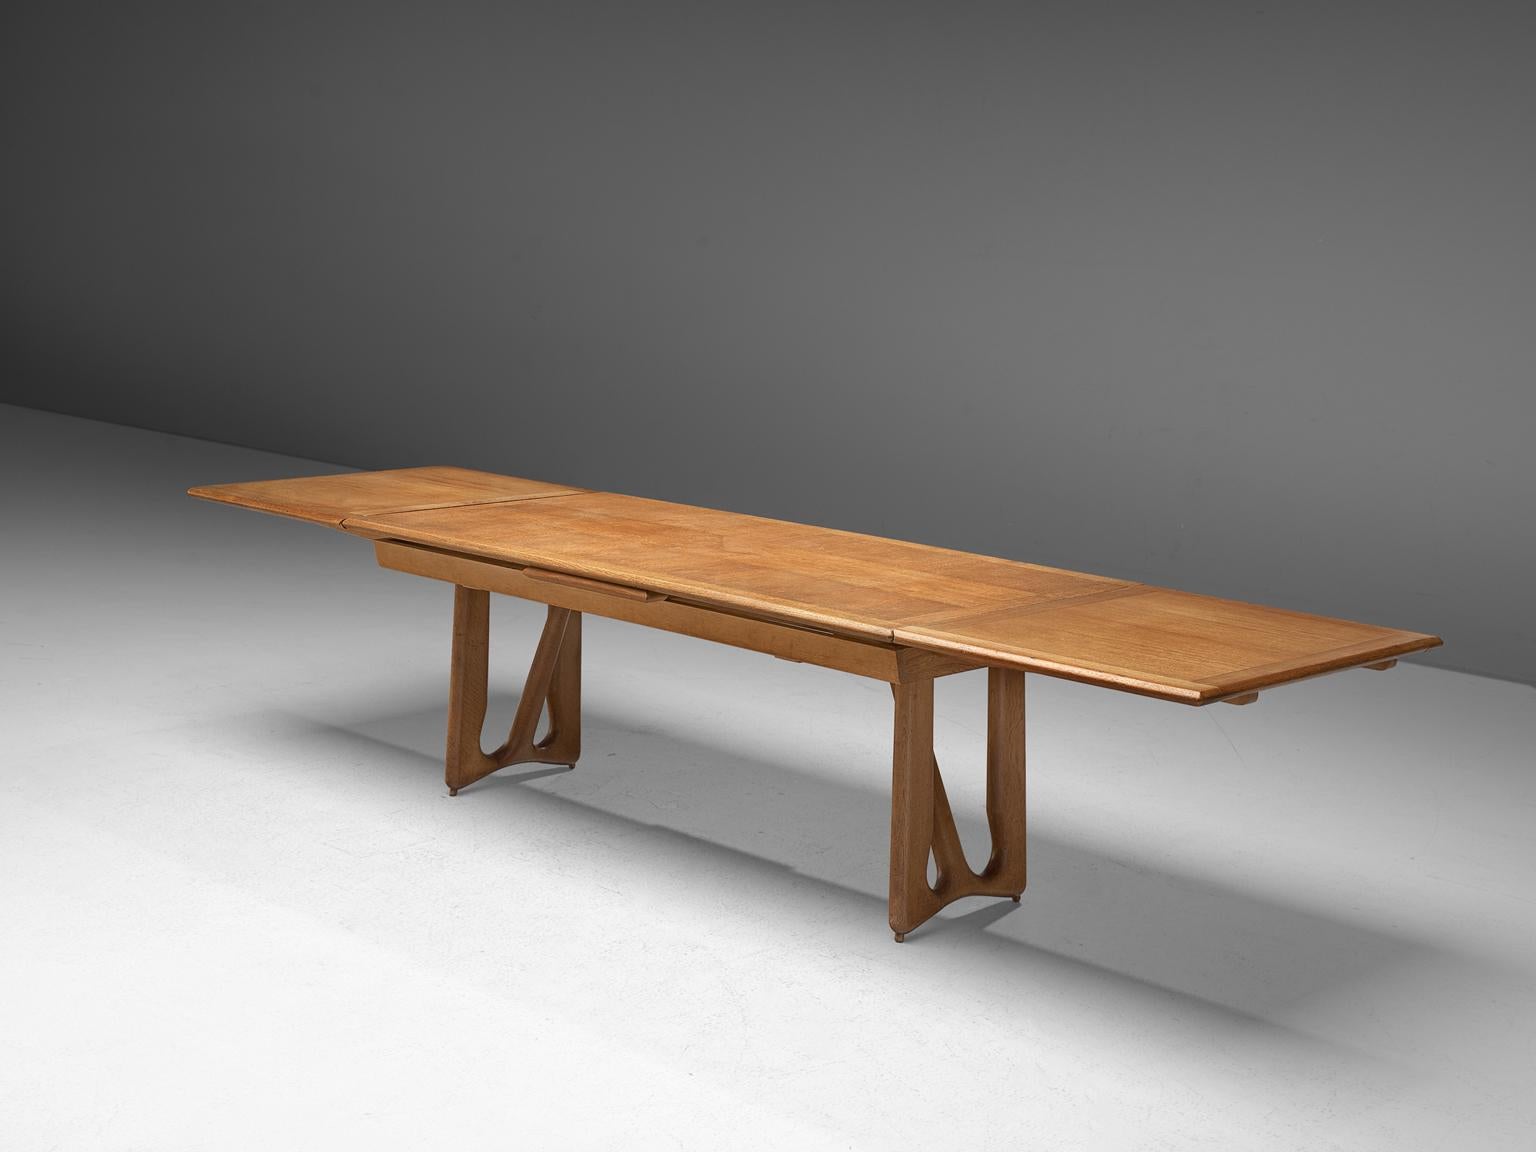 Guillerme et Chambron, dining table, oak, France, 1965.

Extendable dining table in solid oak by French designers Guillerme et Chambron. This elegant table shows interesting details. Most attractive is the inlayed top. These graphical patterns